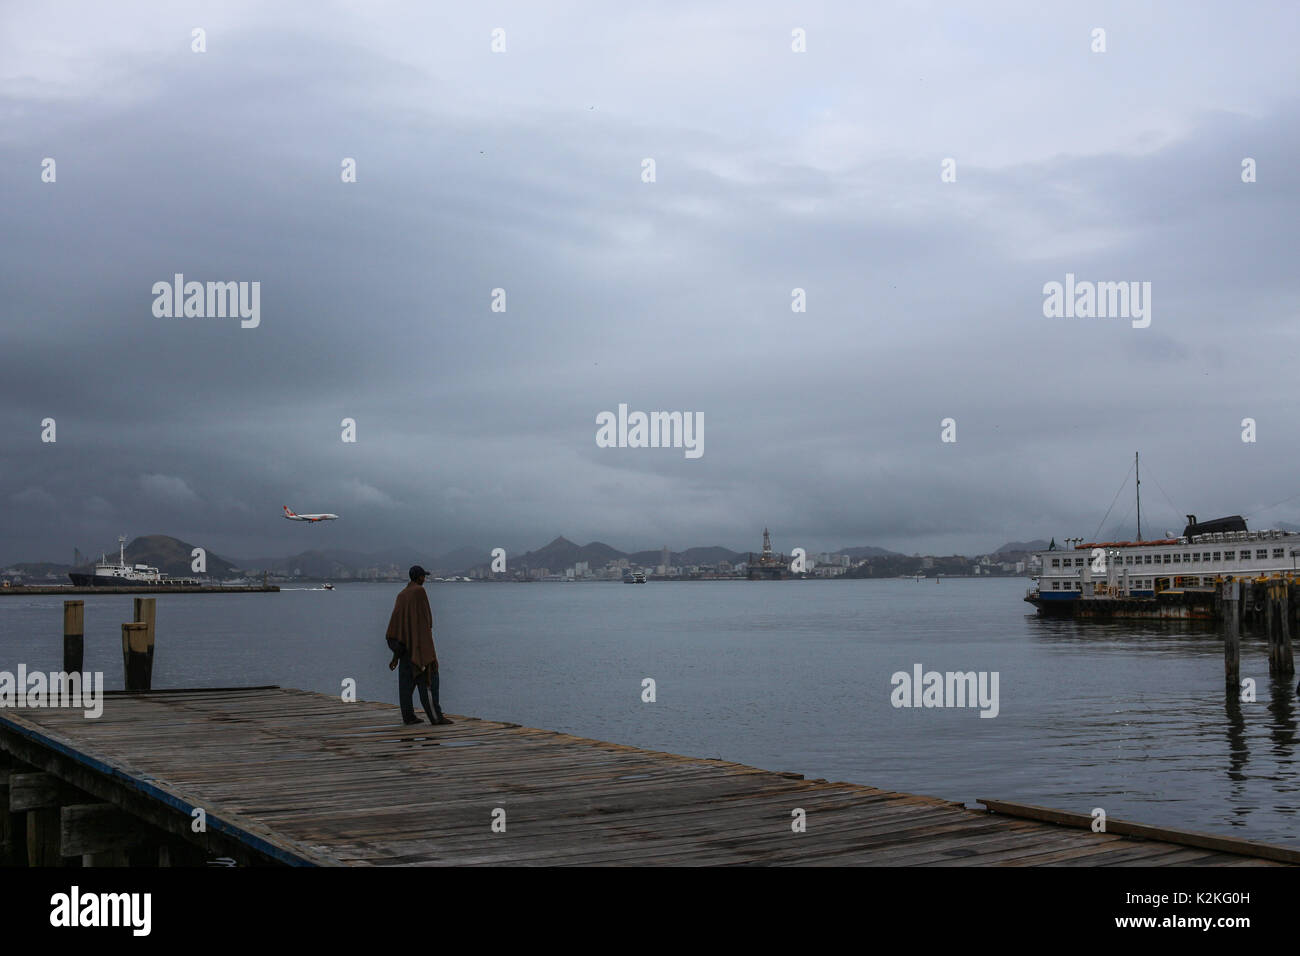 Rio de Janeiro, Brazil, August 31, 2017: End of August is marked by falling temperatures in the city of Rio de Janeiro. The thermometers marked below 20 degrees celsius. In this image Gol plane flies over Guanabara Bay en route from Santos Dumont Airport in cold and cloudy day in downtown Rio. Credit: Luiz Souza/Alamy Live News Stock Photo